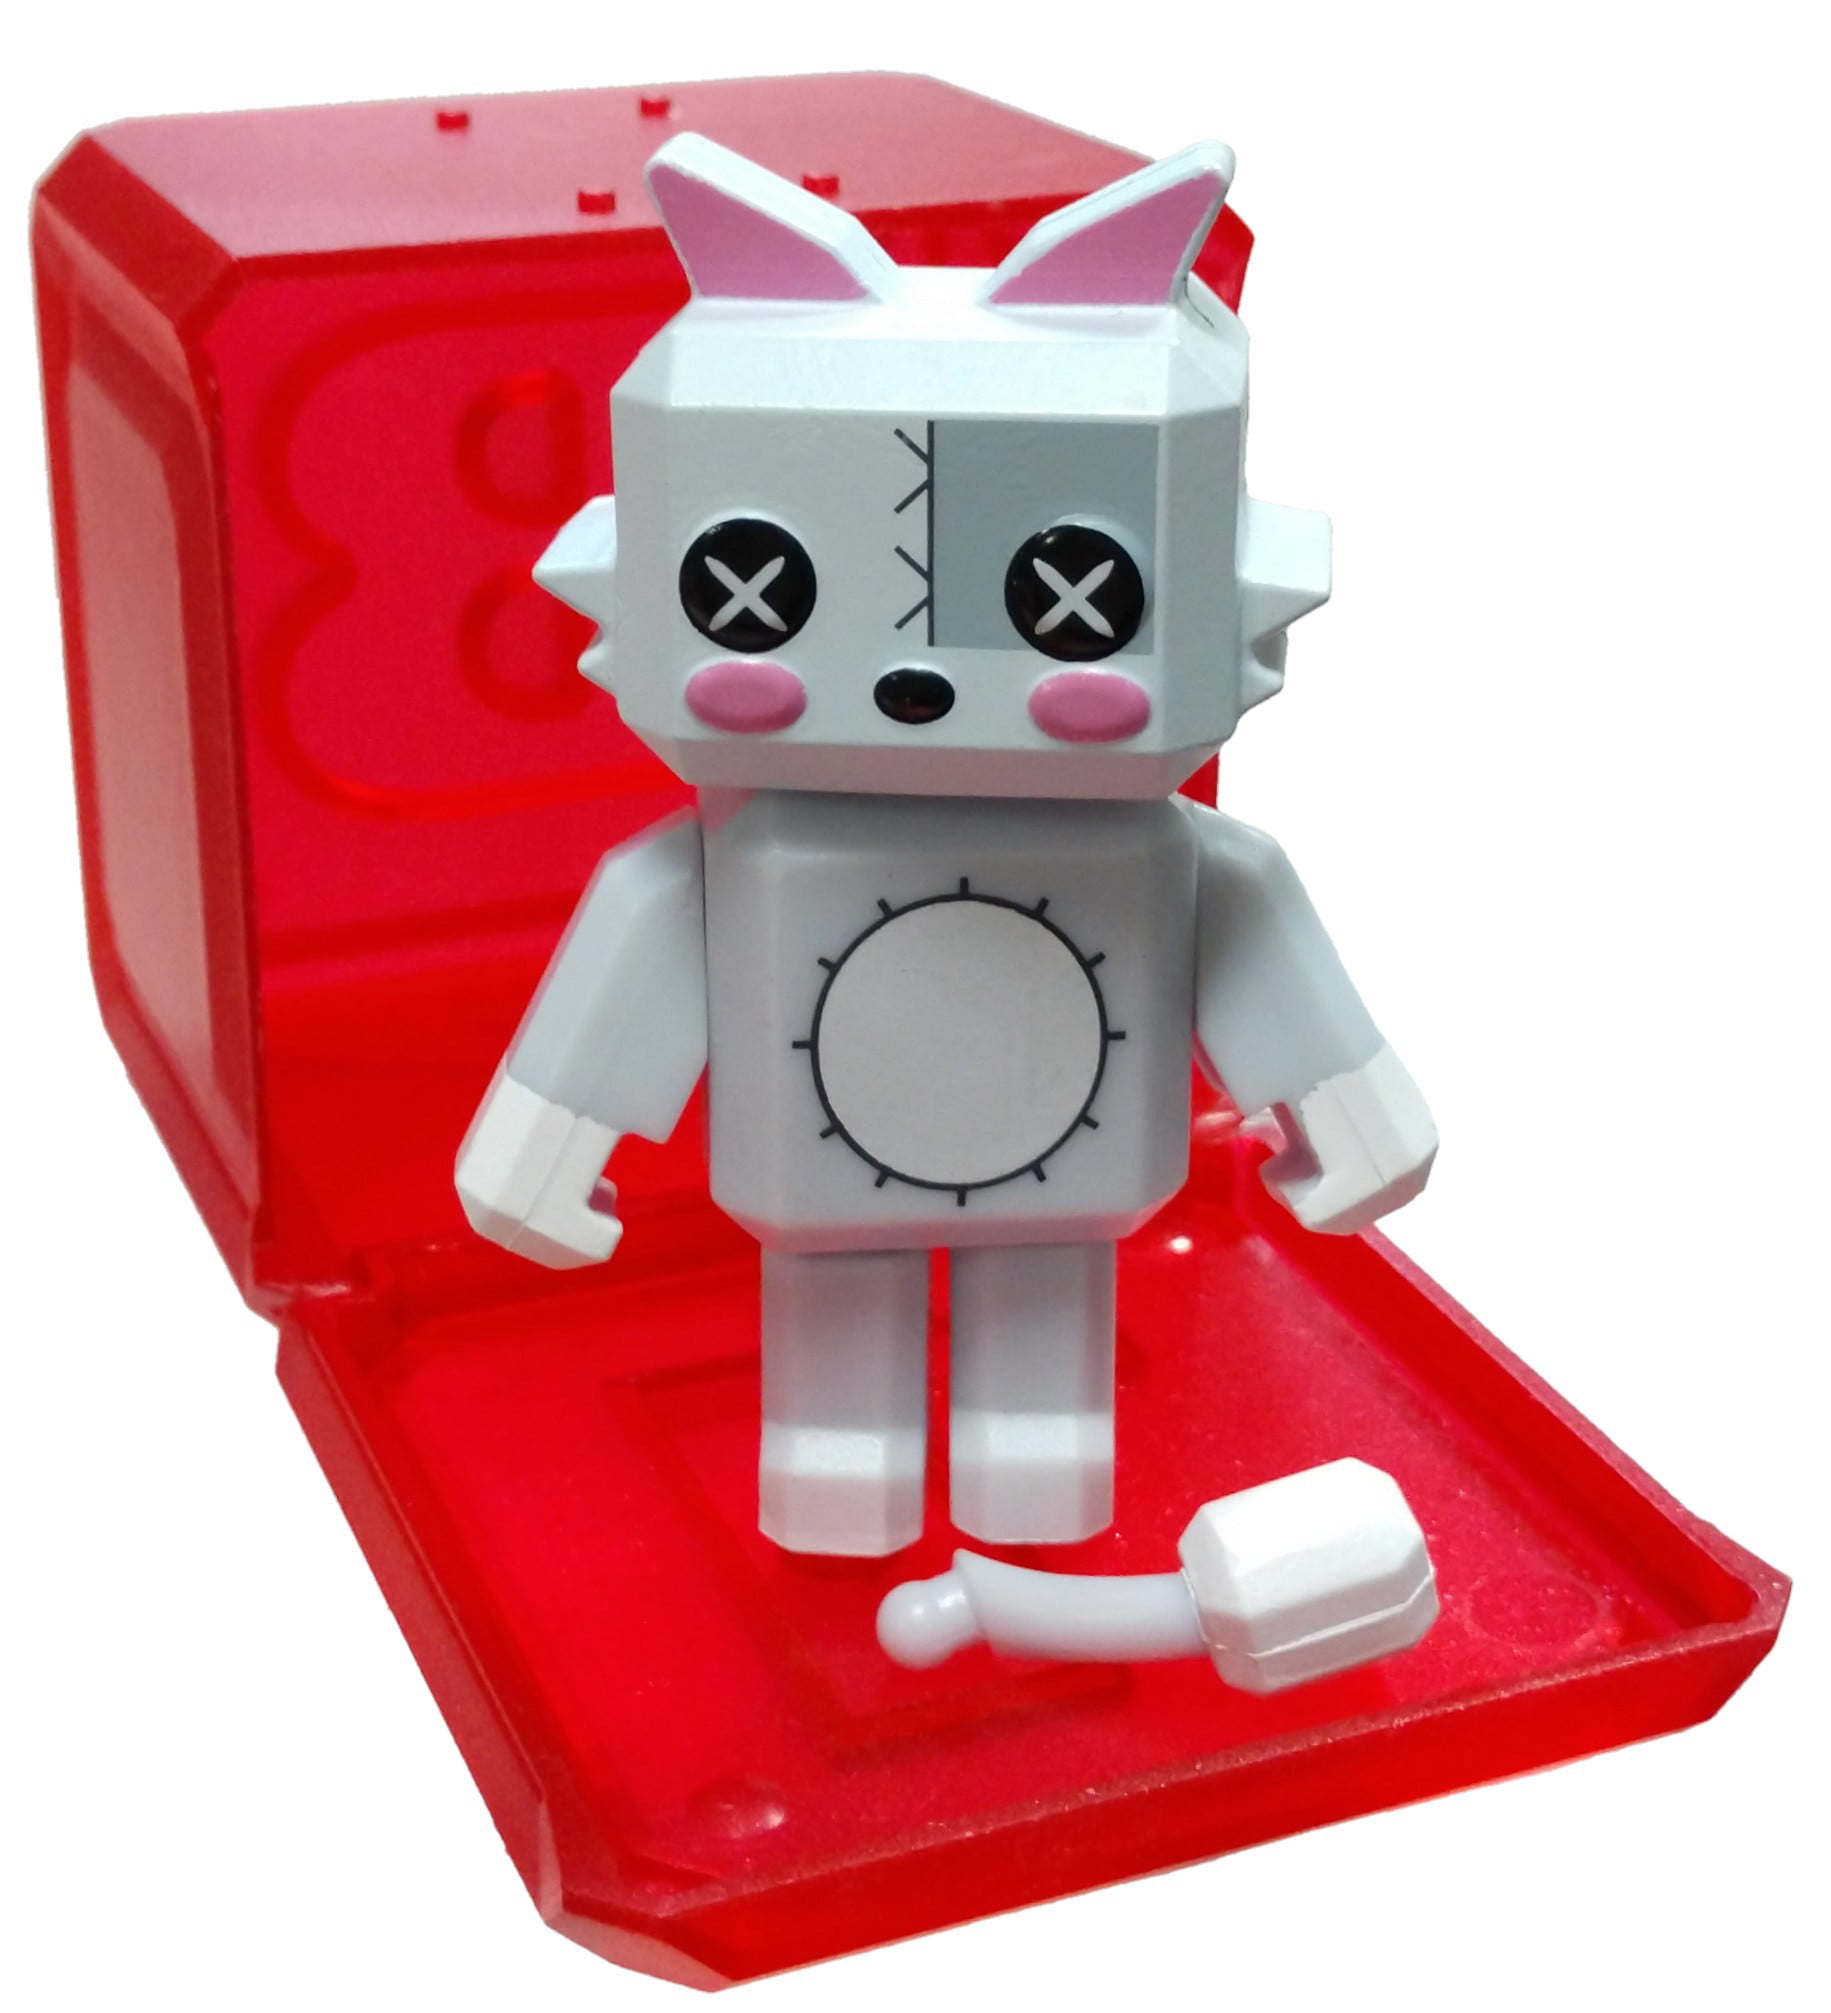 Roblox Celebrity Collection Series 5 Book Of Monsters Kittens Mini Figure With Red Cube And Online Code No Packaging Walmart Com Walmart Com - roblox series 5 codes